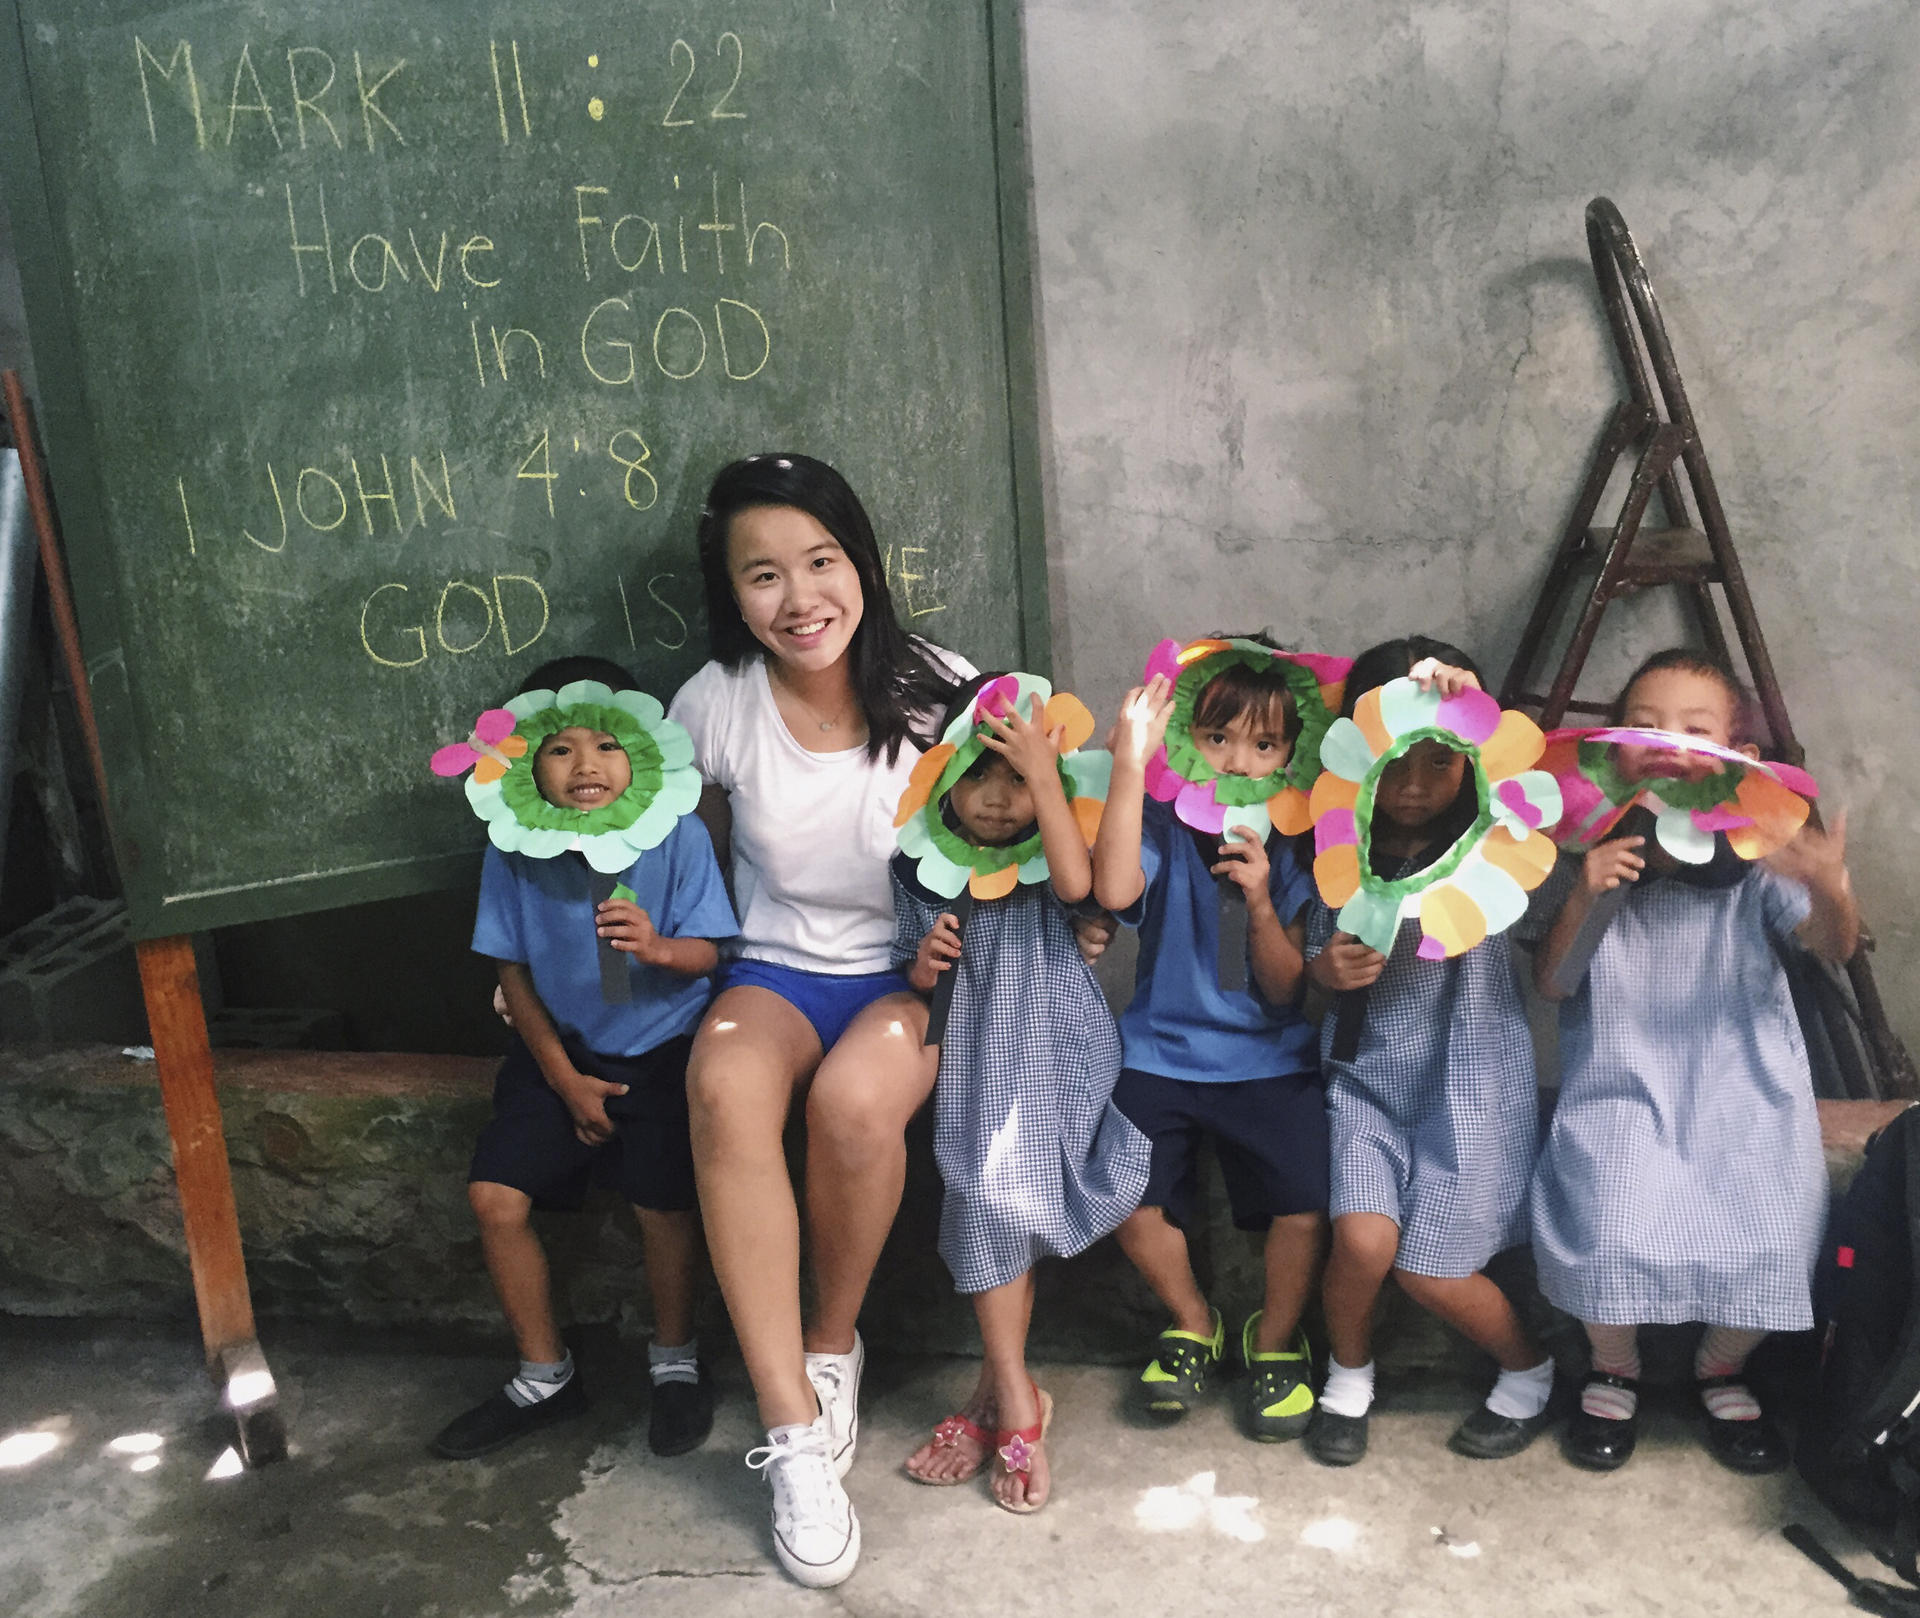 Experienced student volunteer Imogen Yih with children in the city of Dumaguete, in the Philippine province of Negros Oriental.